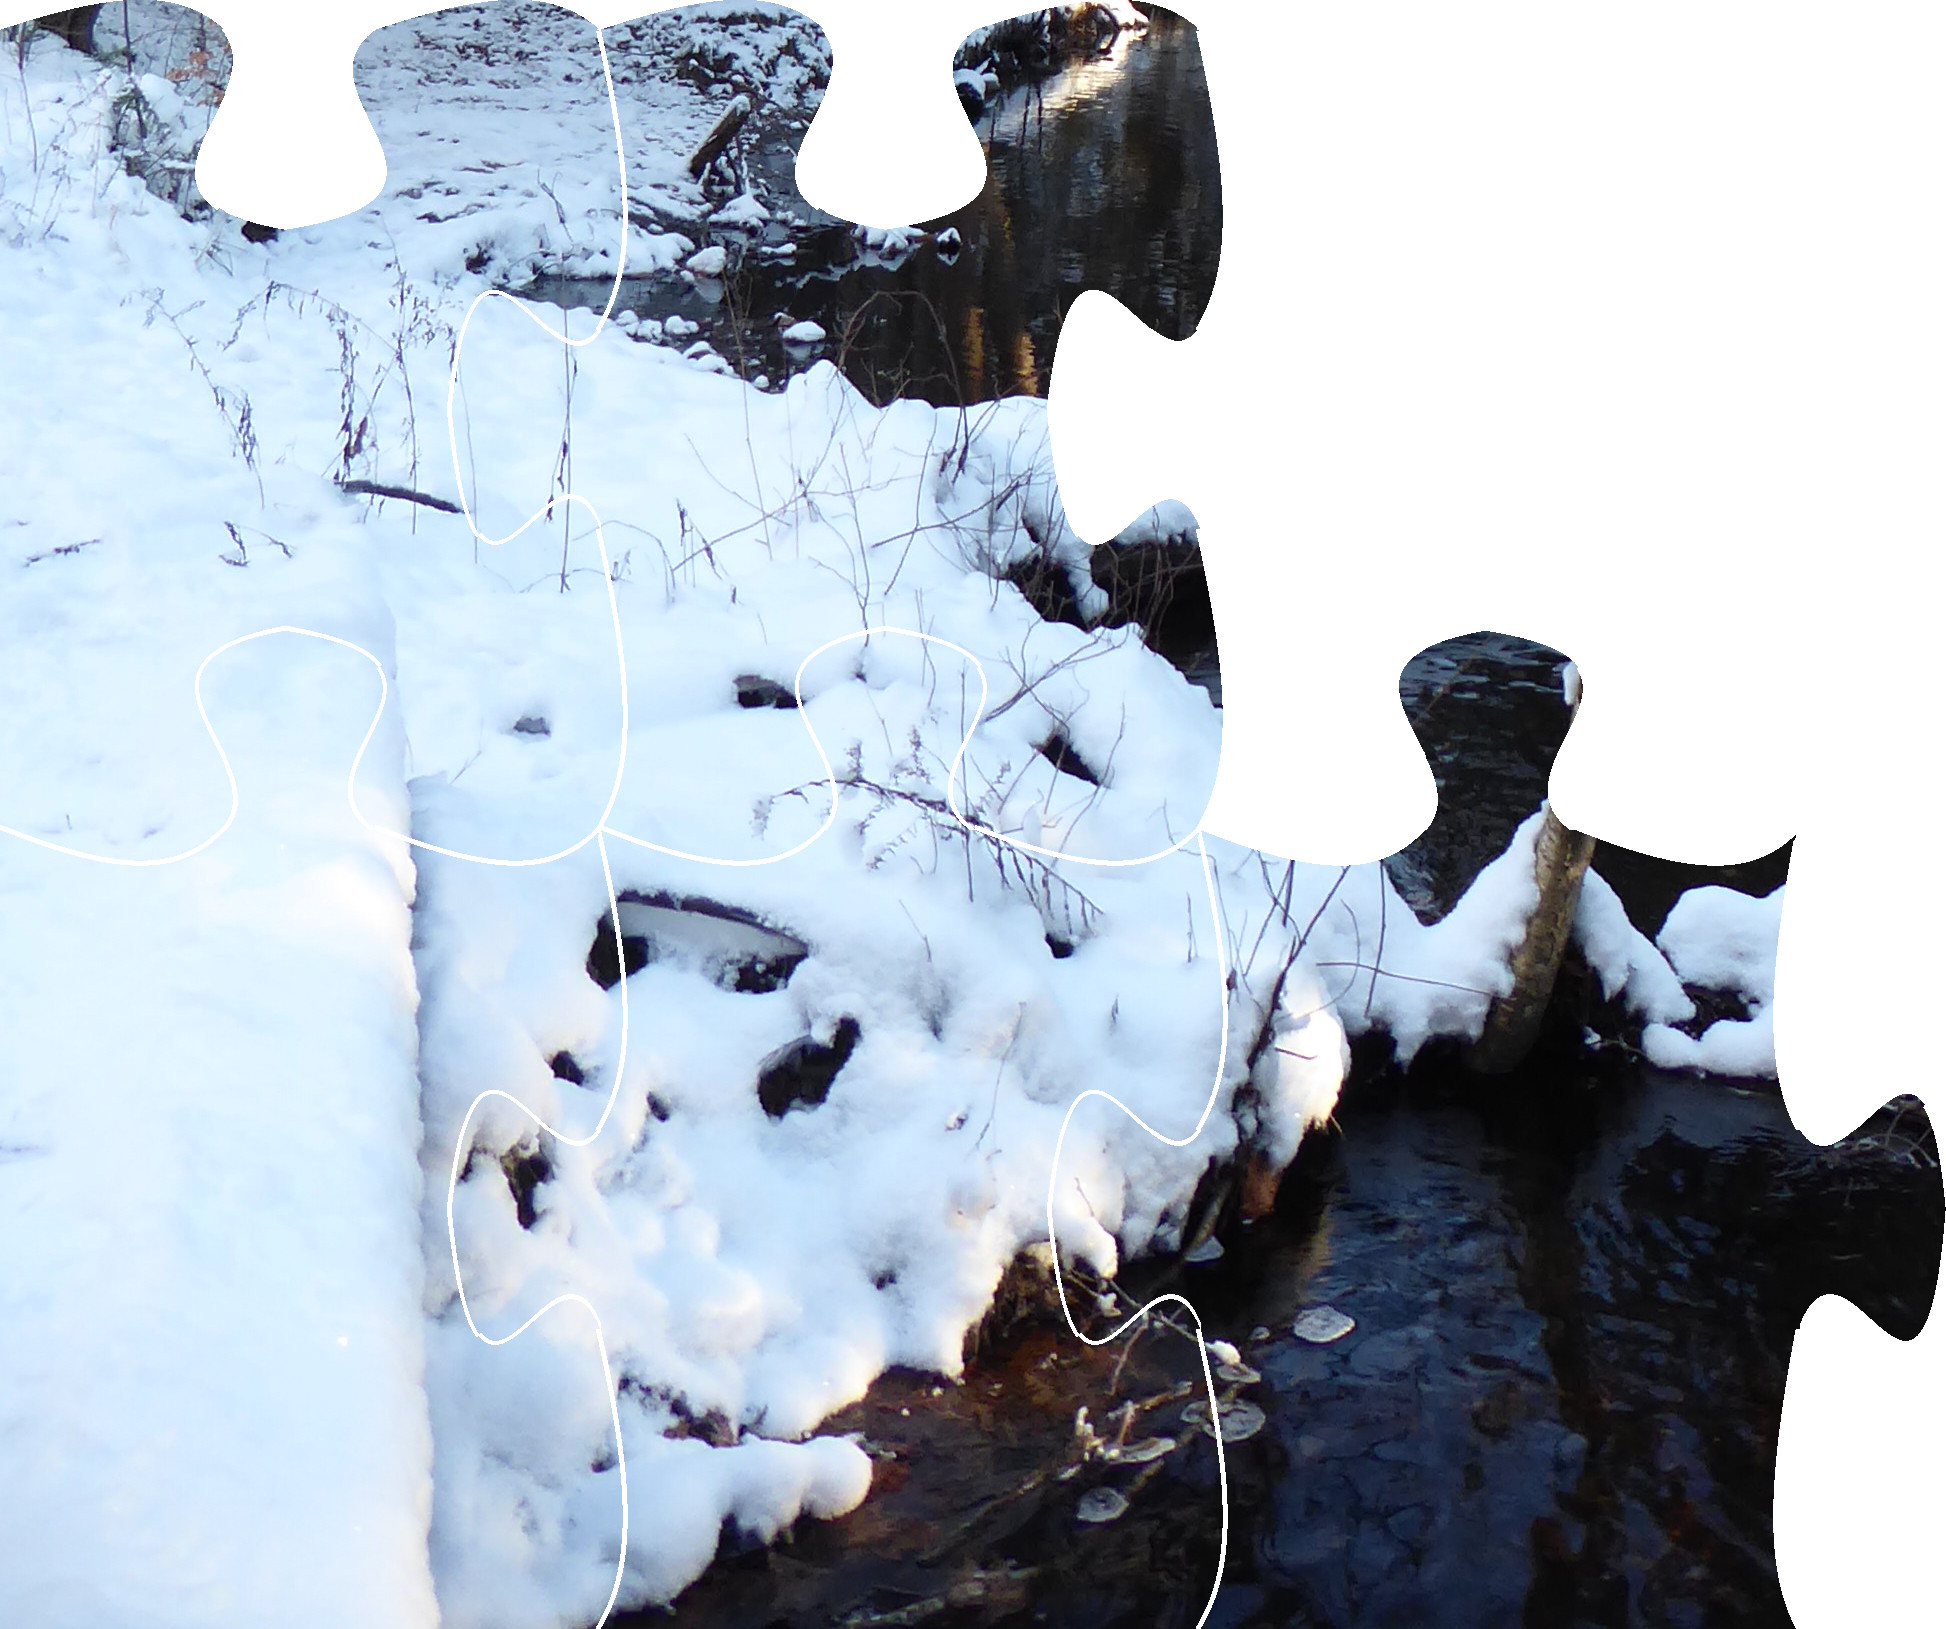 Five jigsaw pieces form the bottom-left section of a puzzle. Dark water and snowy ground suggest that the puzzle represents a calm winter day by a woodland stream